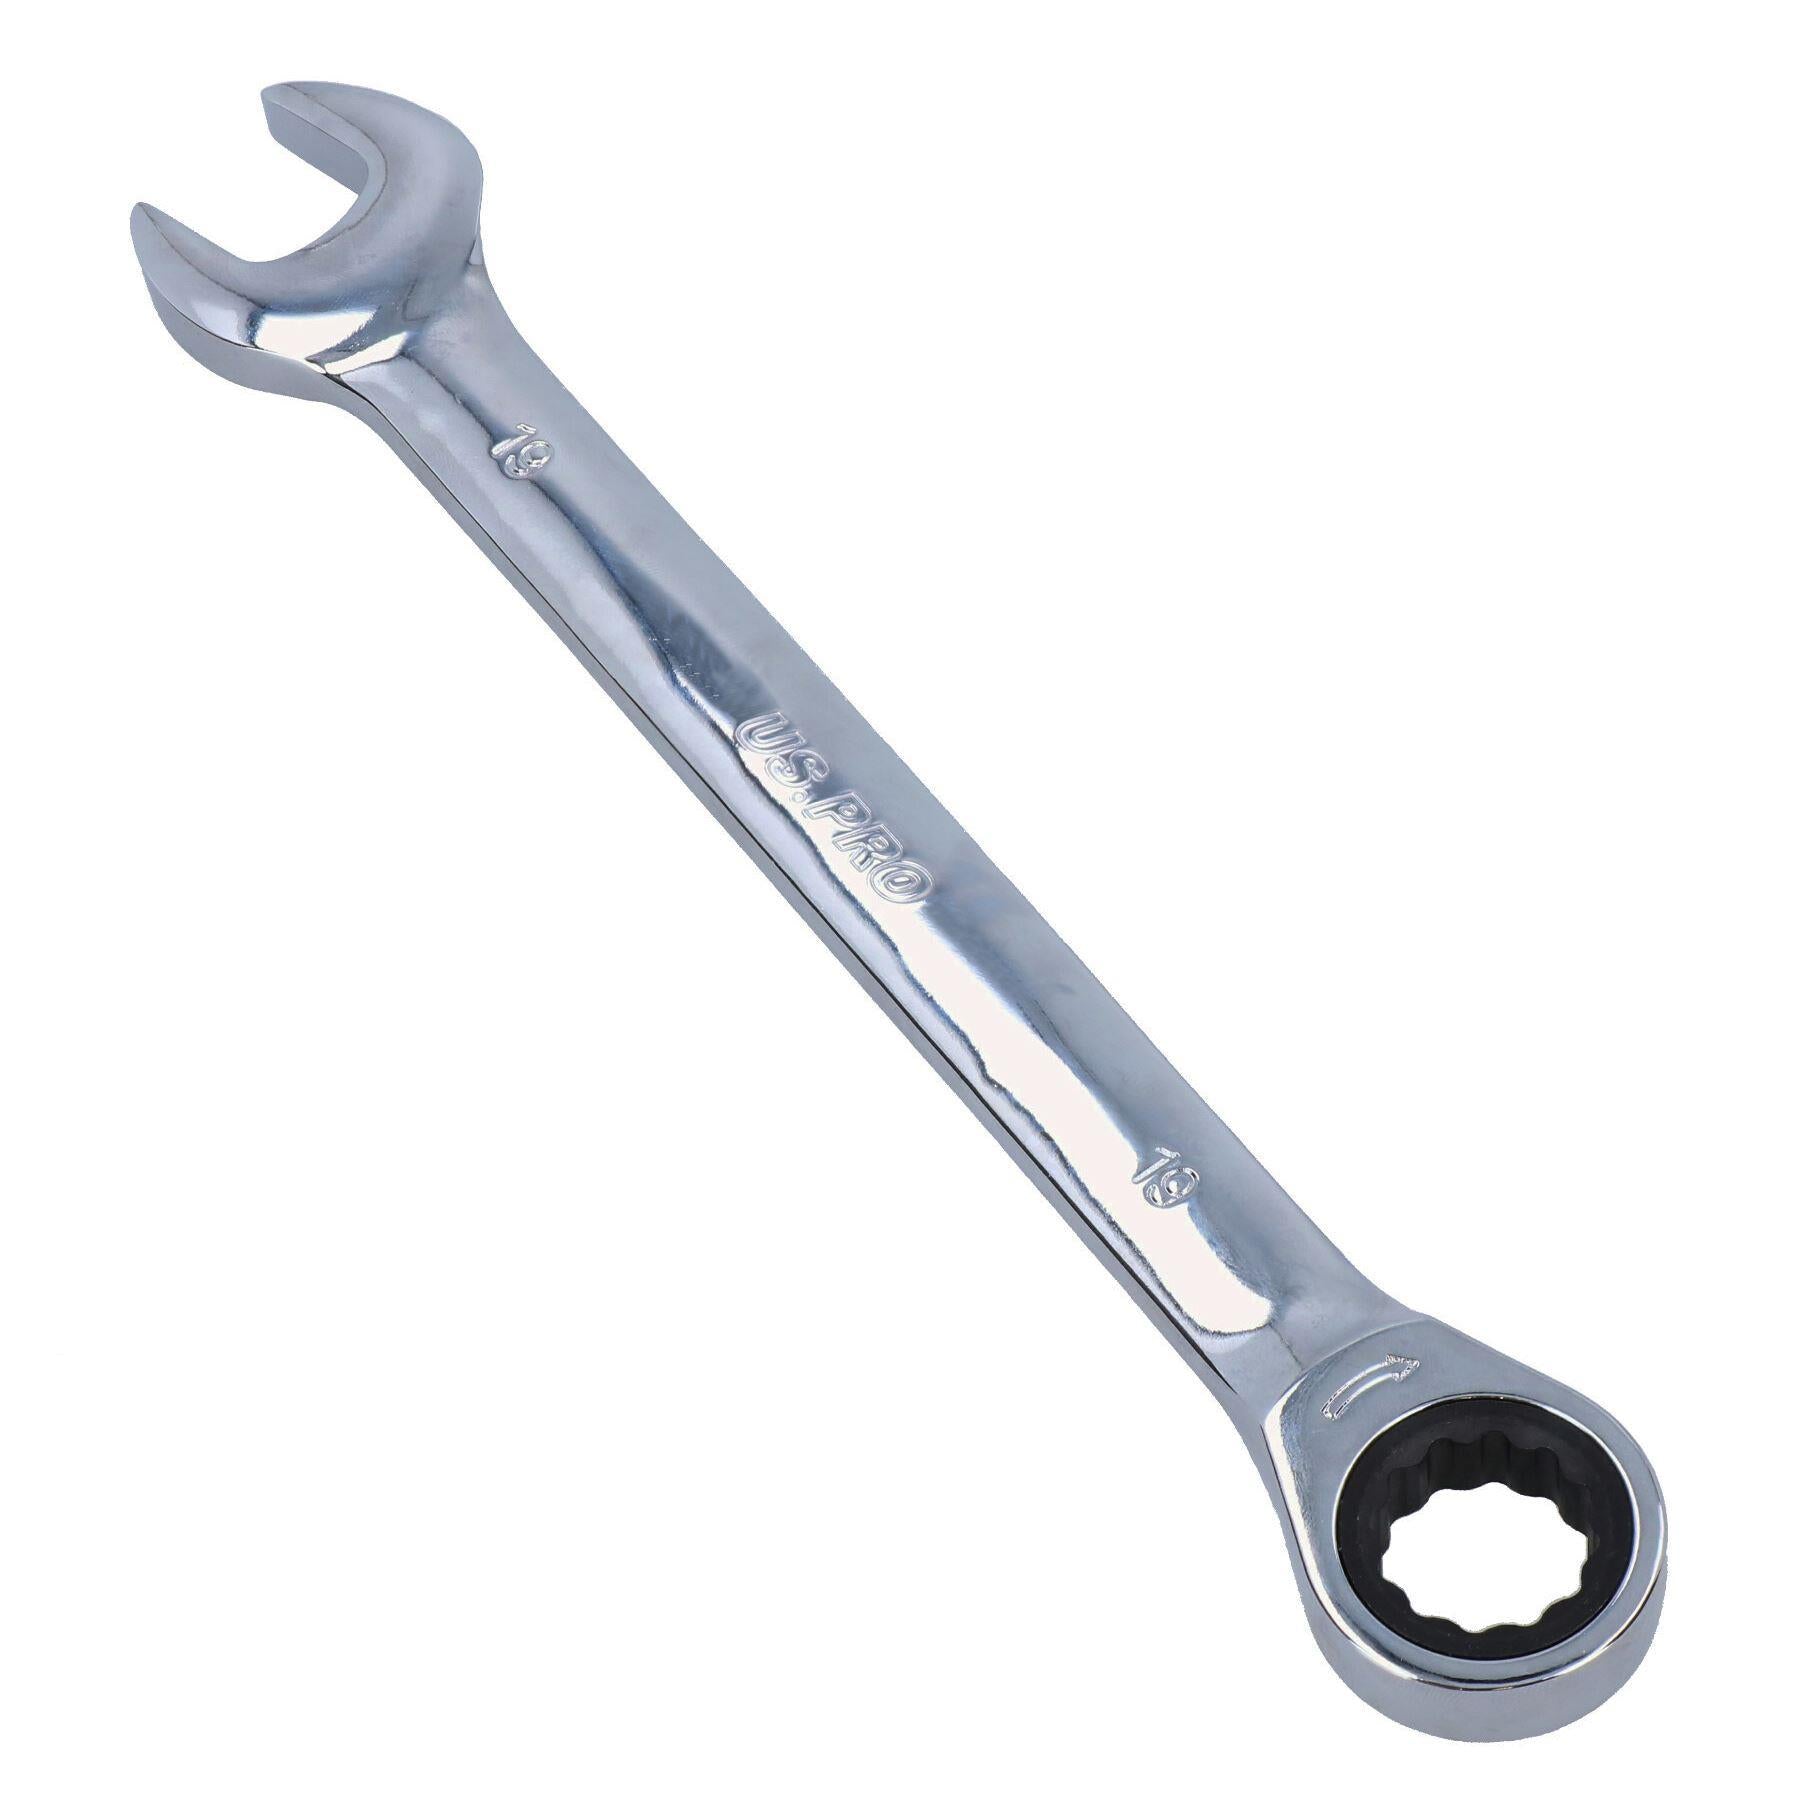 Metric Combination Gear Ratchet Spanner Wrench 72 Teeth 20 – 32mm Variation